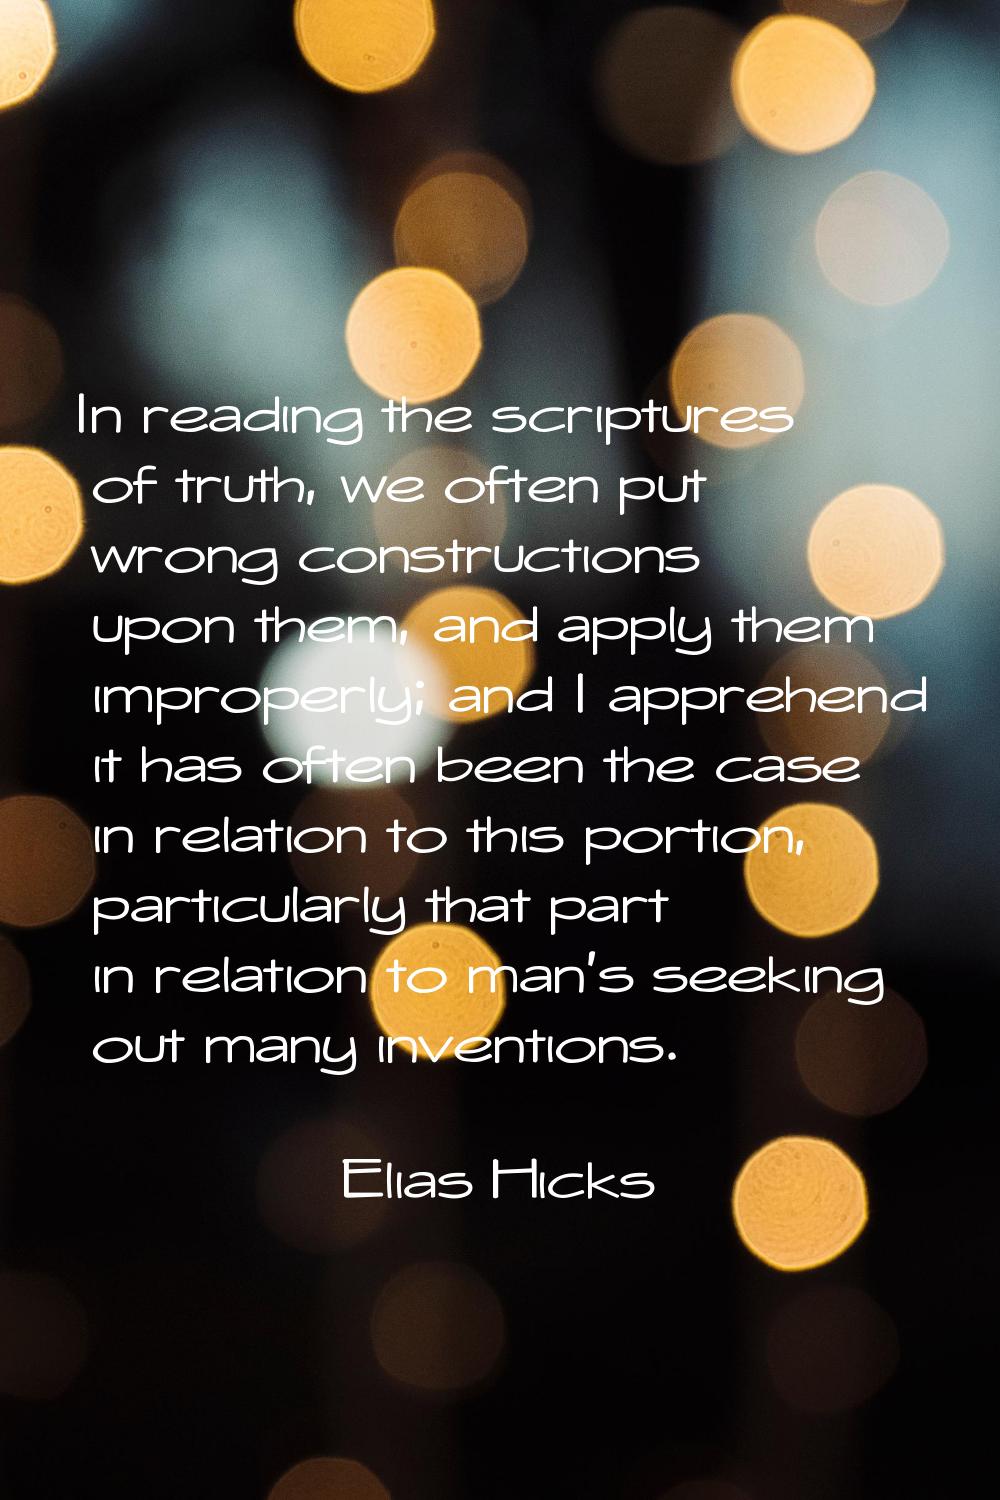 In reading the scriptures of truth, we often put wrong constructions upon them, and apply them impr